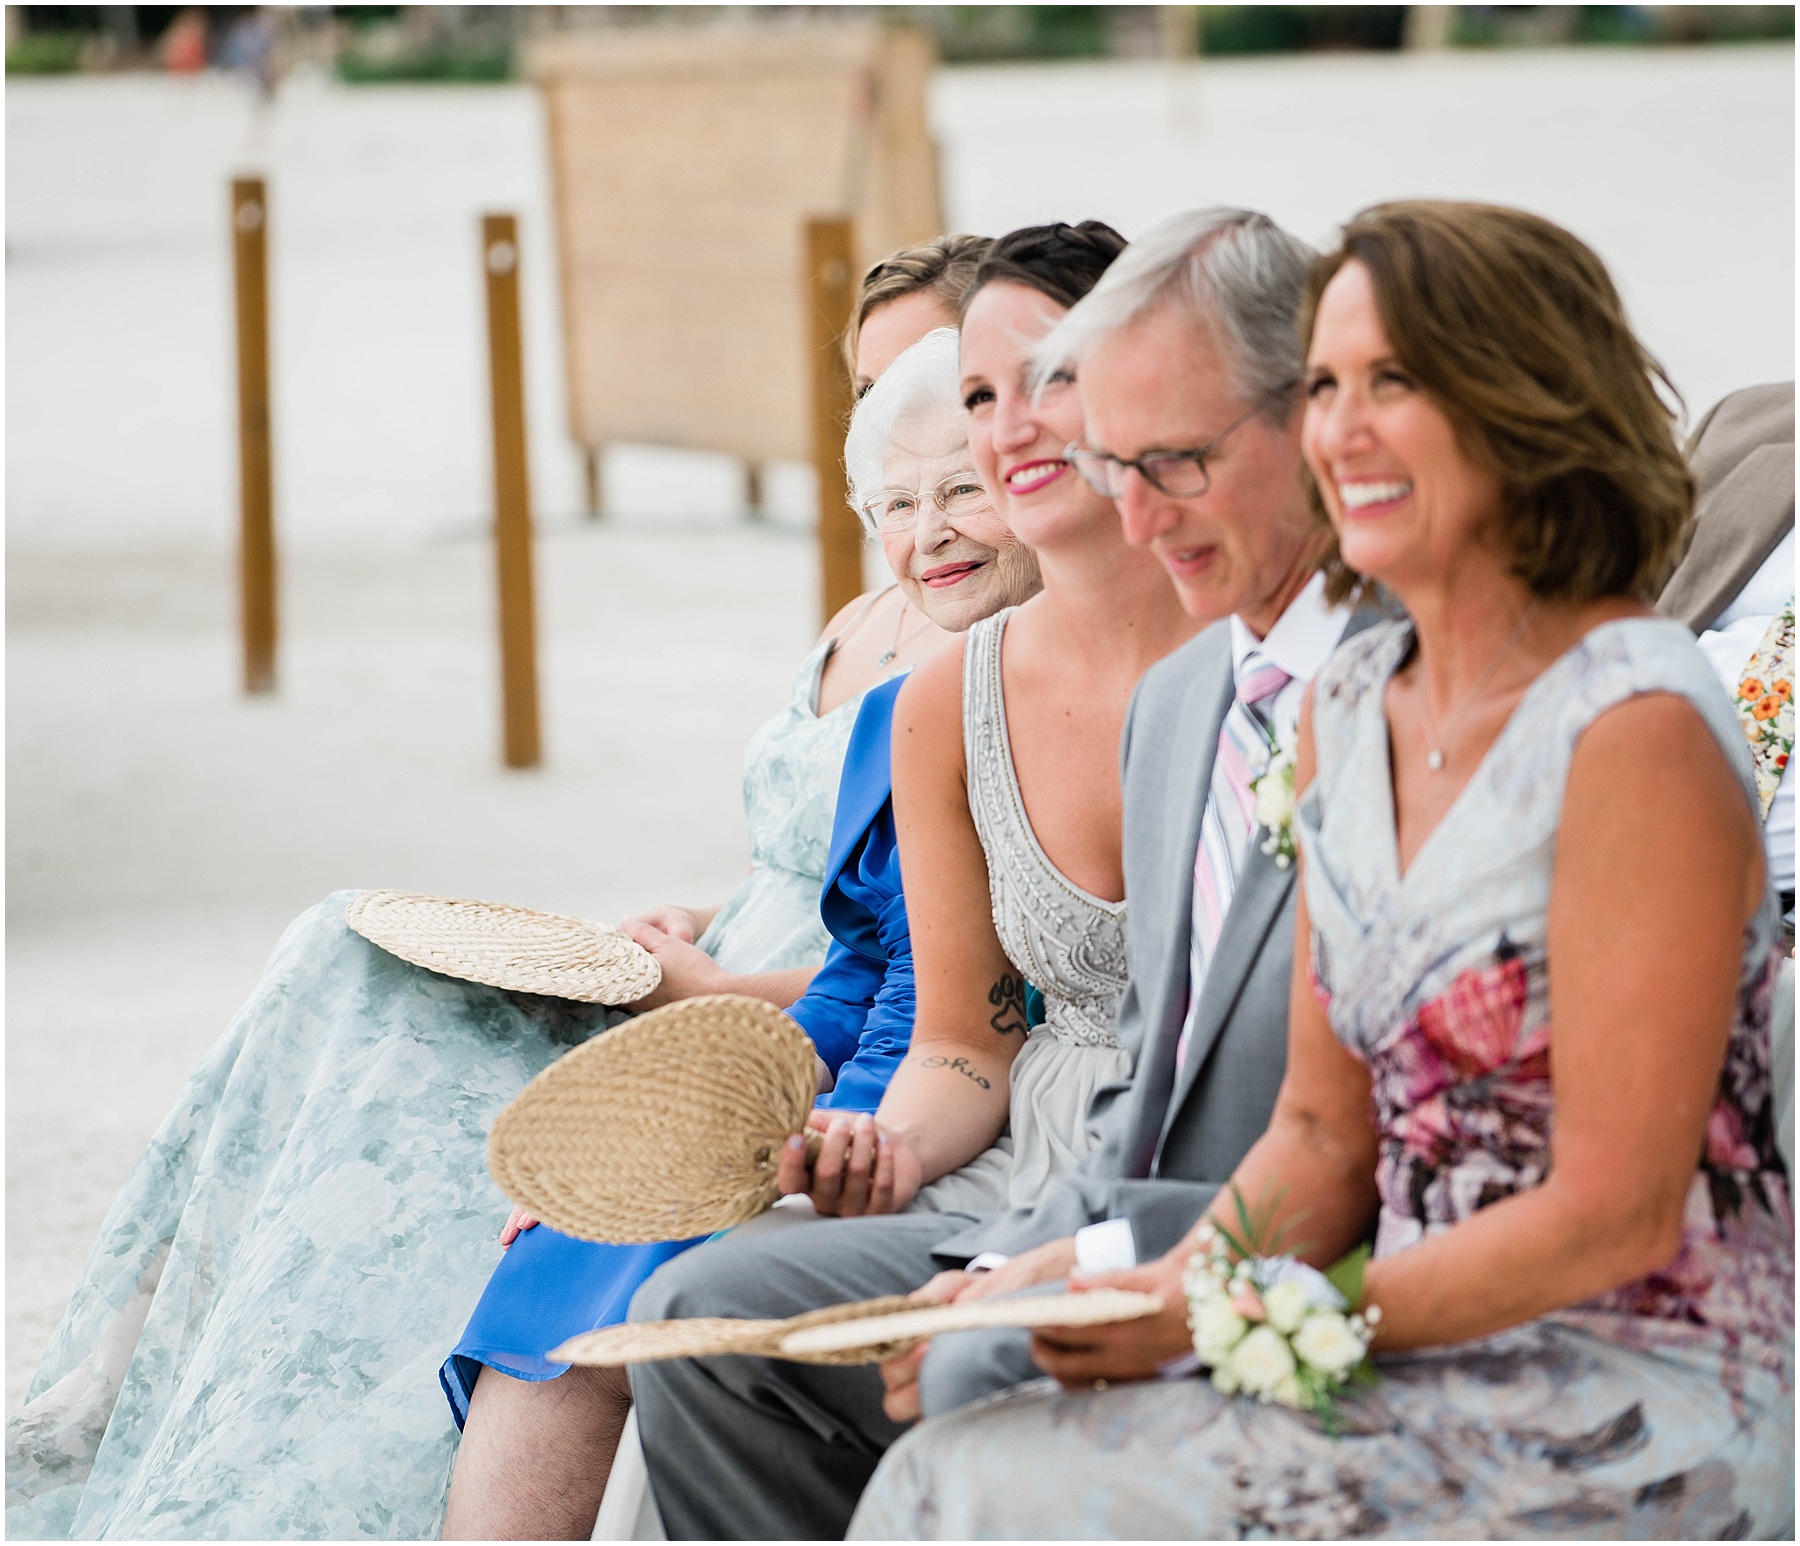 Family of the groom smile during ceremony on wedding day at JW Marriott Marco Island in Florida.